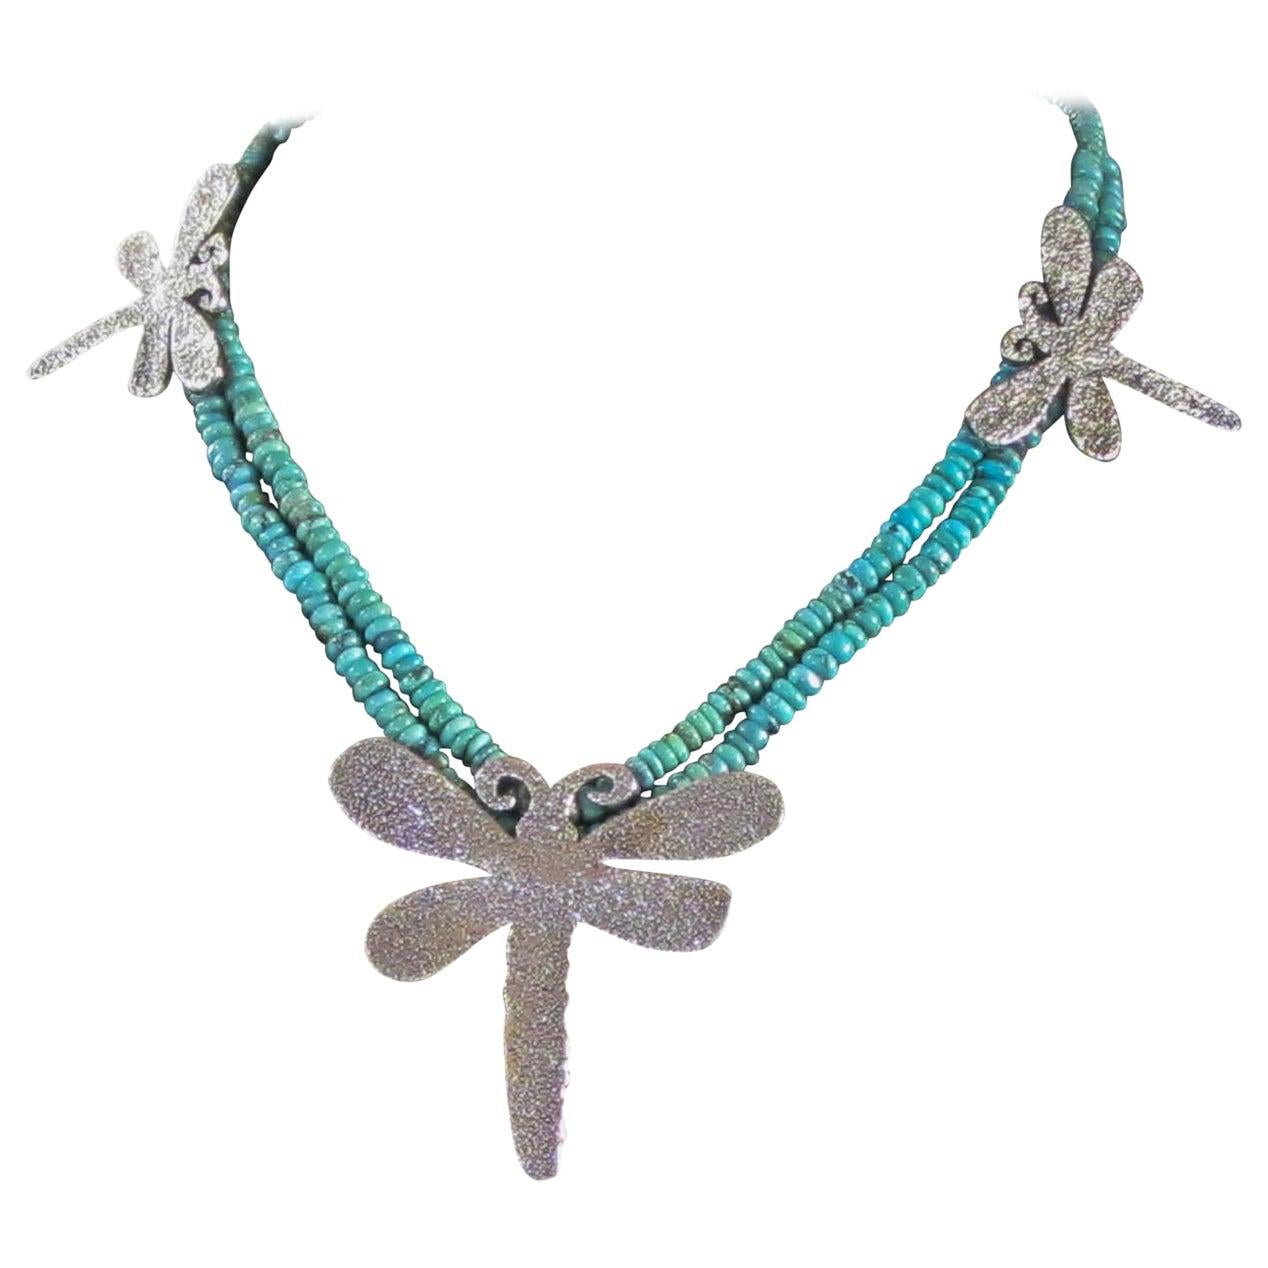 Dragonfly necklace, cast silver, Kingman turquoise, beads, Navajo, artist design For Sale